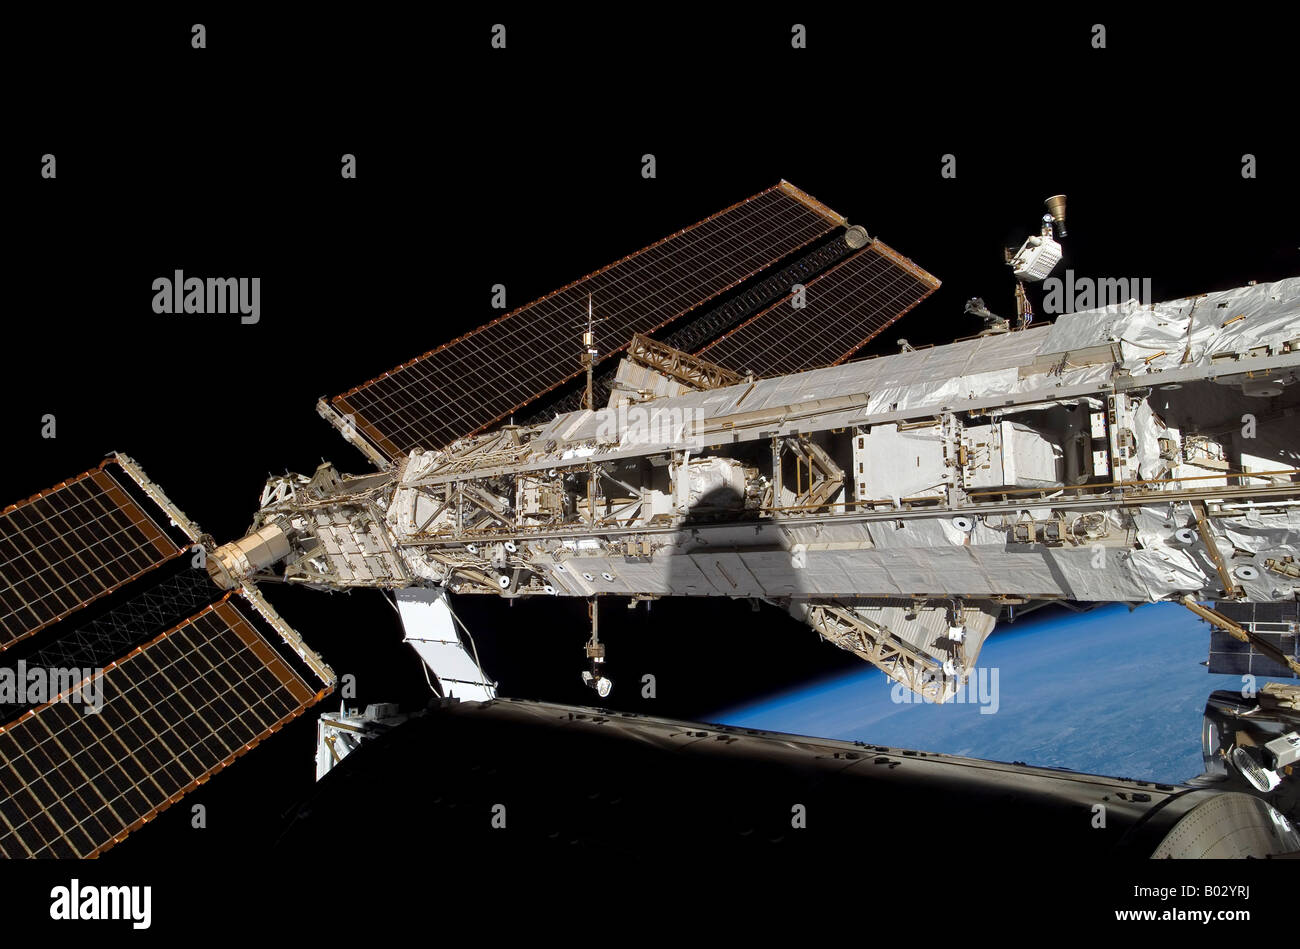 A truss and solar panels on the International Space Station. Stock Photo